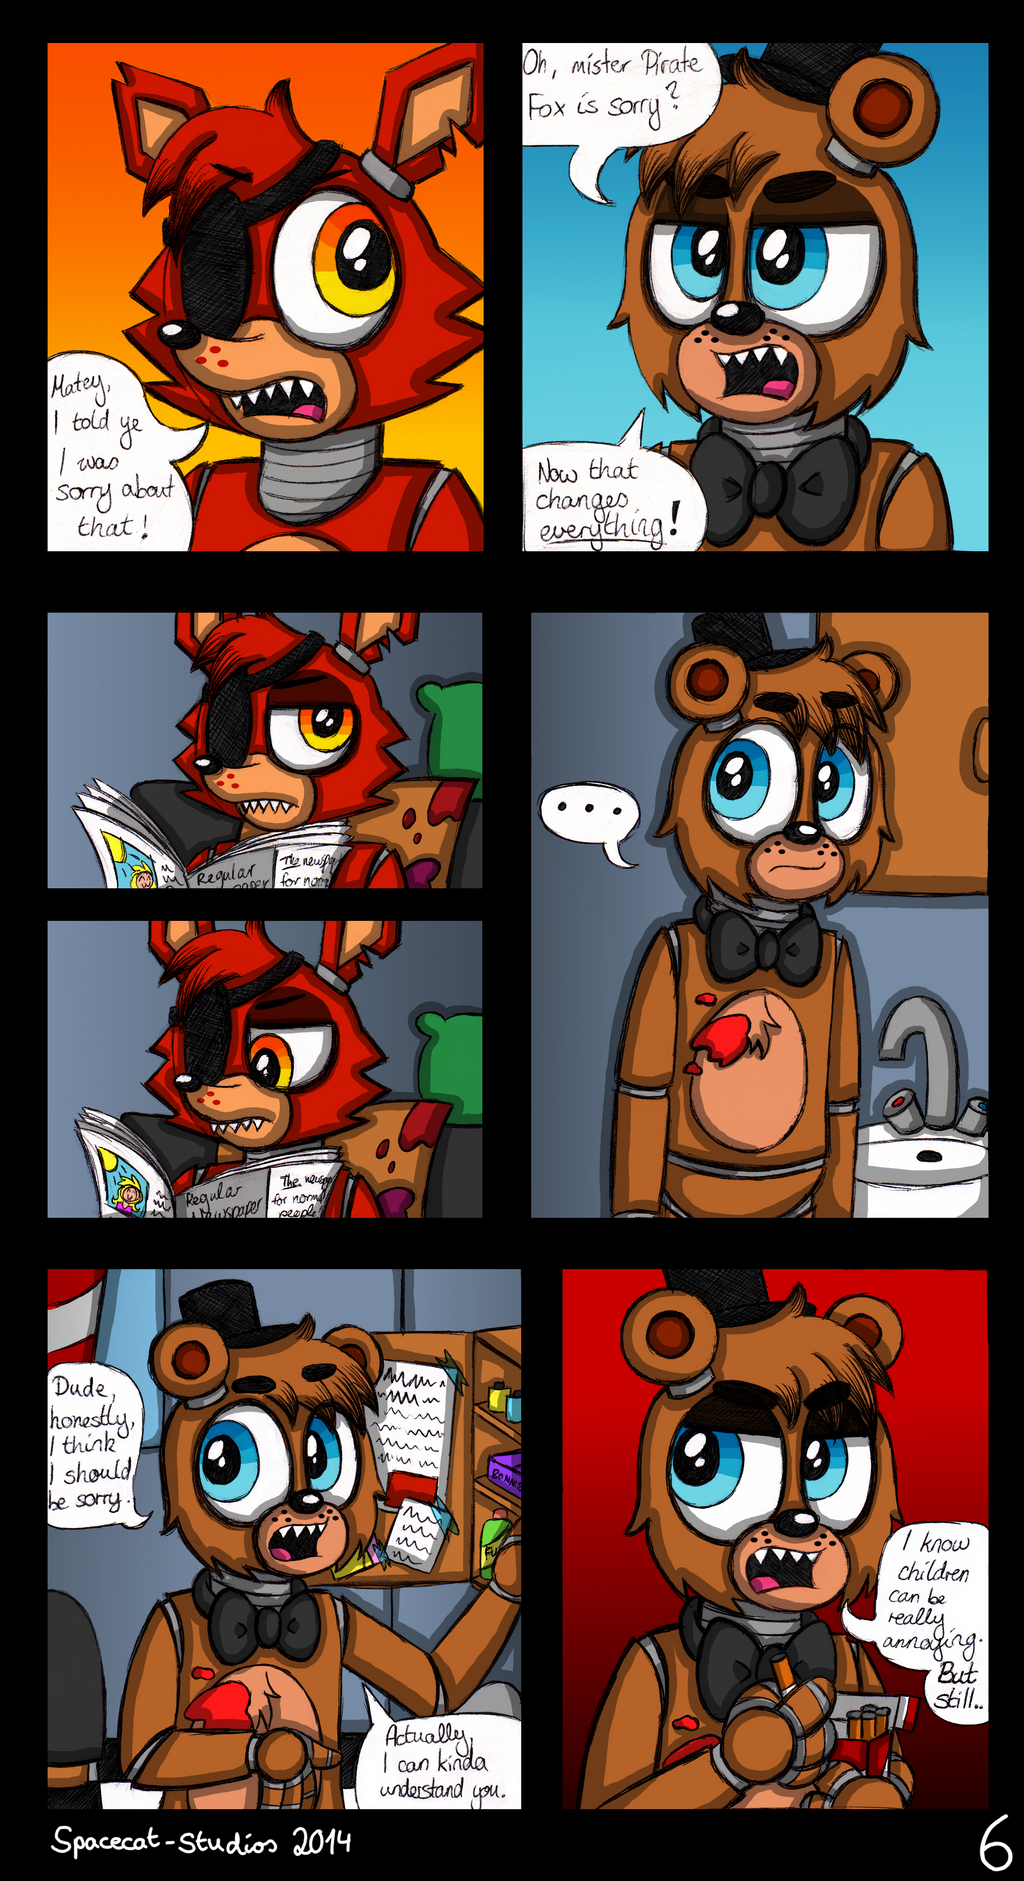 Out Of Order A FNaF Comic Ch. 1 P. 6 by SpacecatStudios on DeviantArt